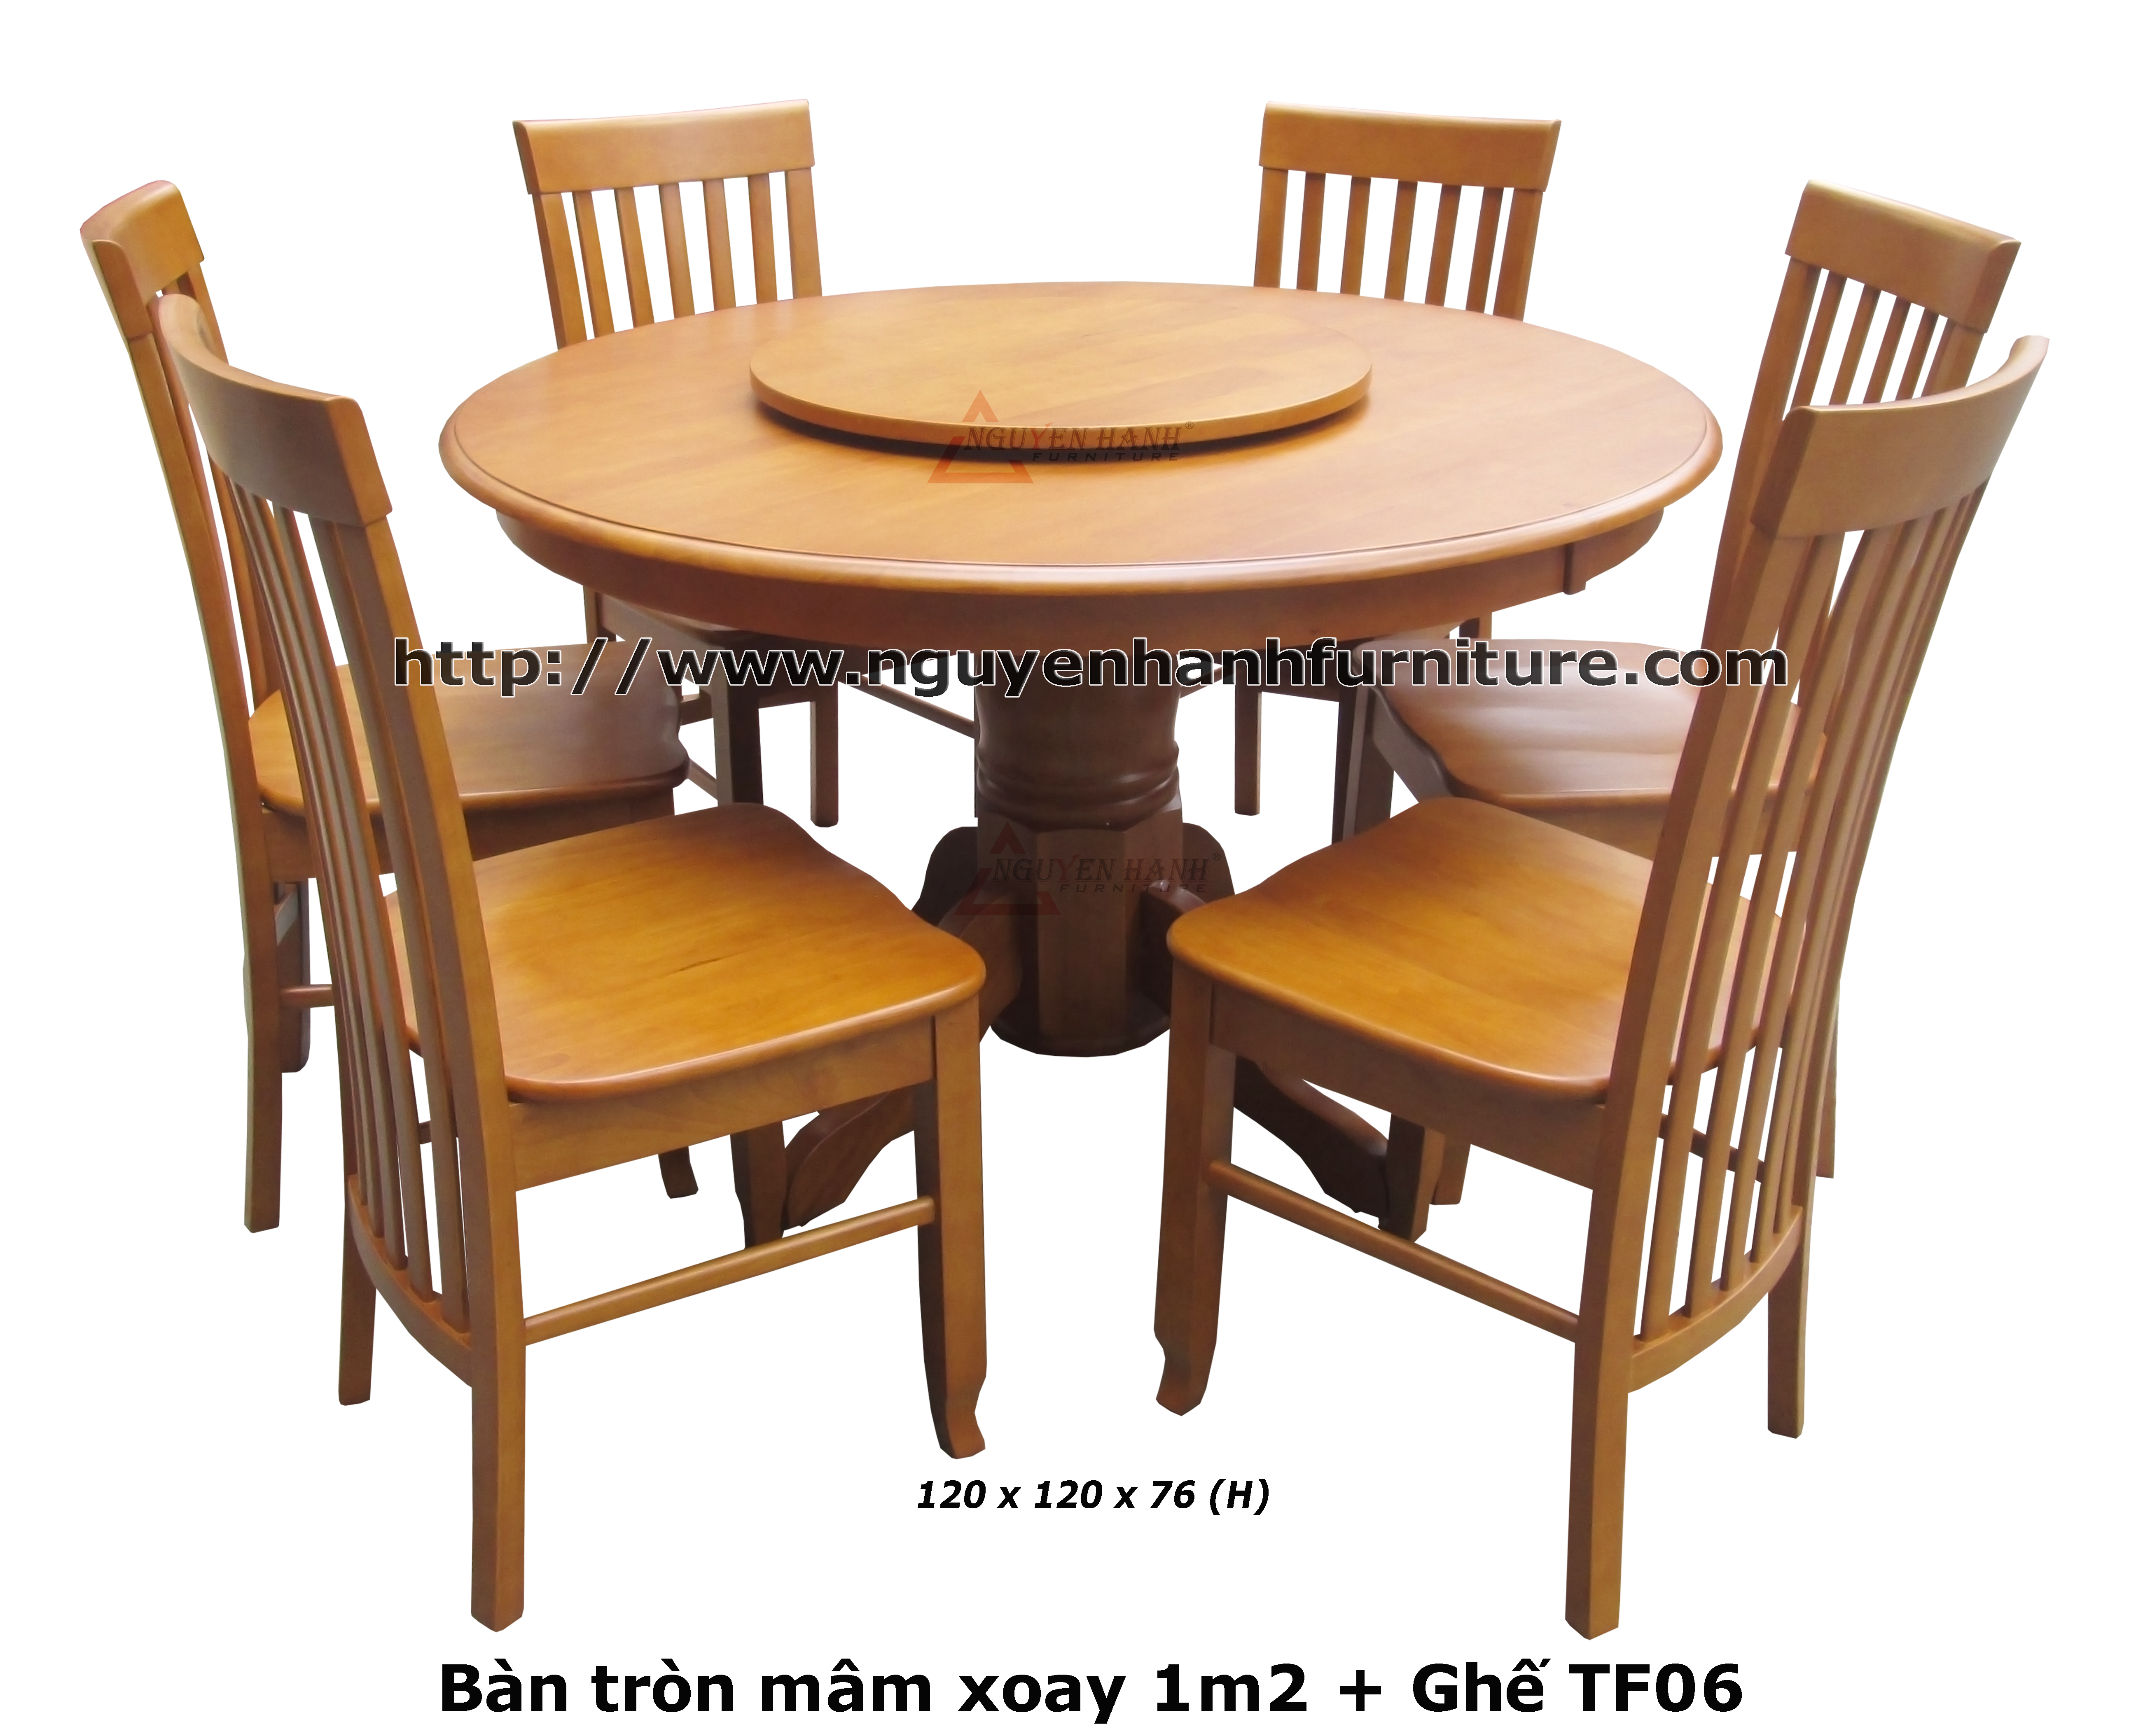 Name product: 120 Round table with chair TF06 chair - Dimensions: 120 x 120 x 76 (H) - Description: Wood natural rubber